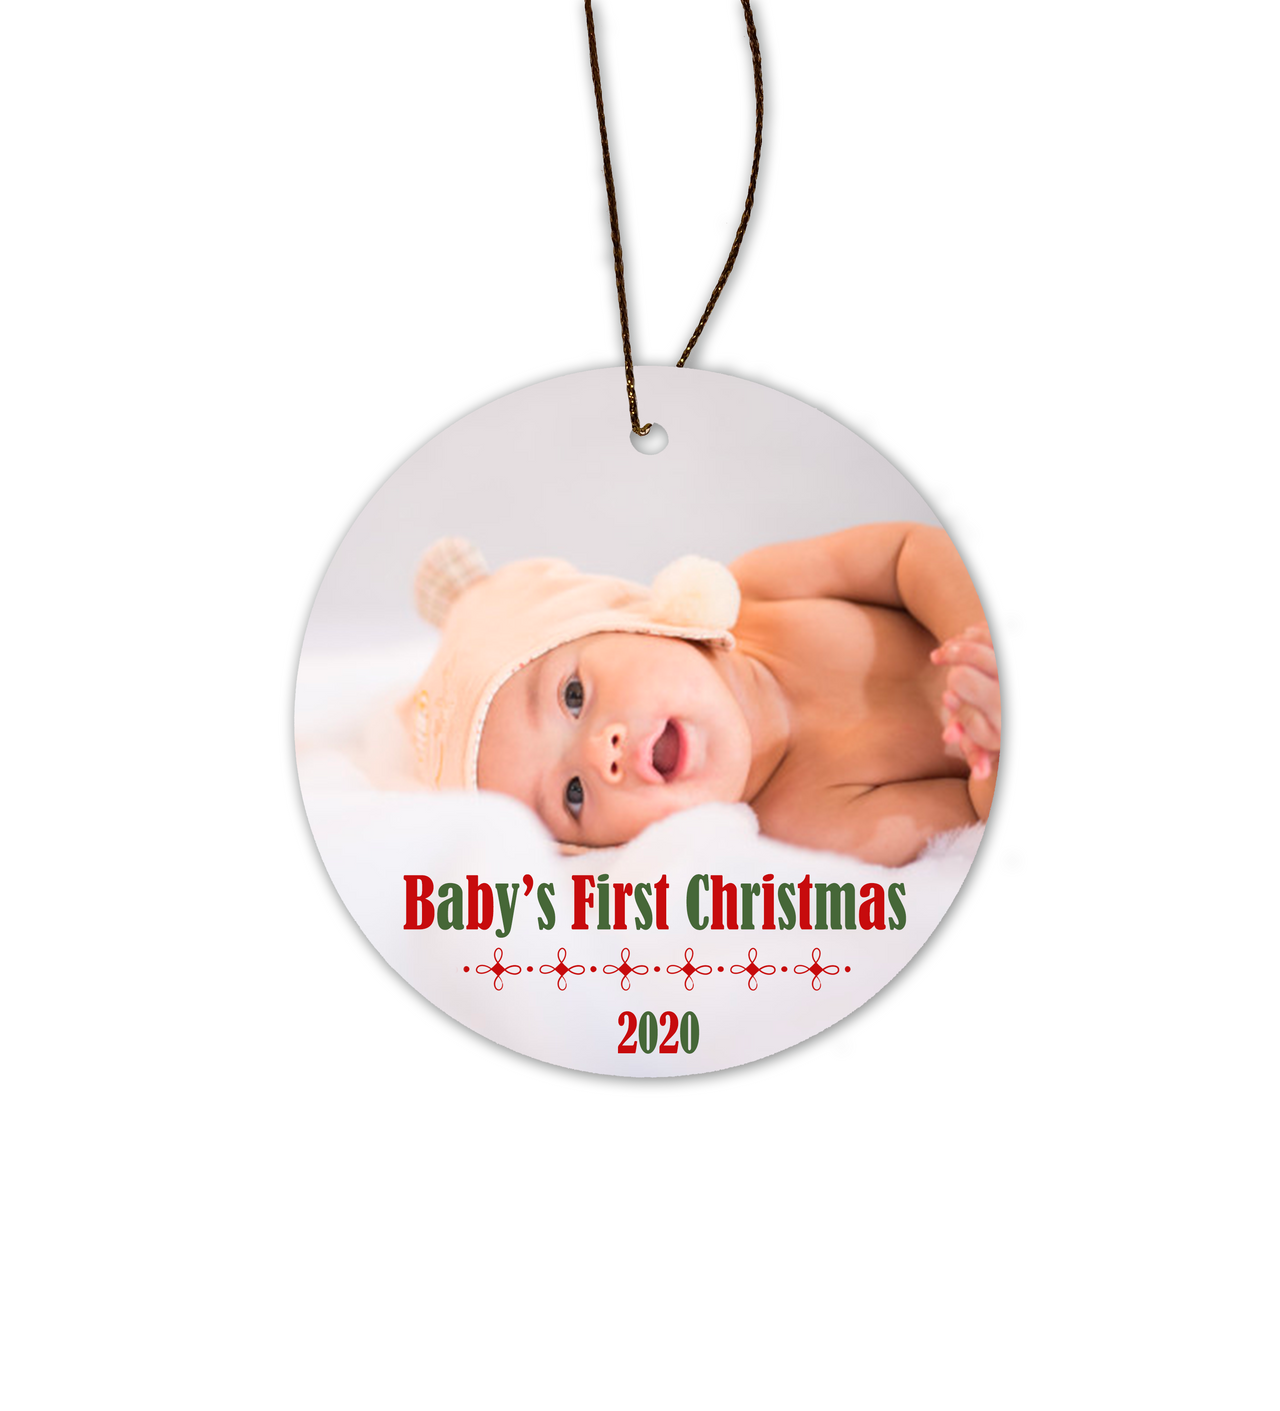 Baby's First Christmas Round Glass Ornament